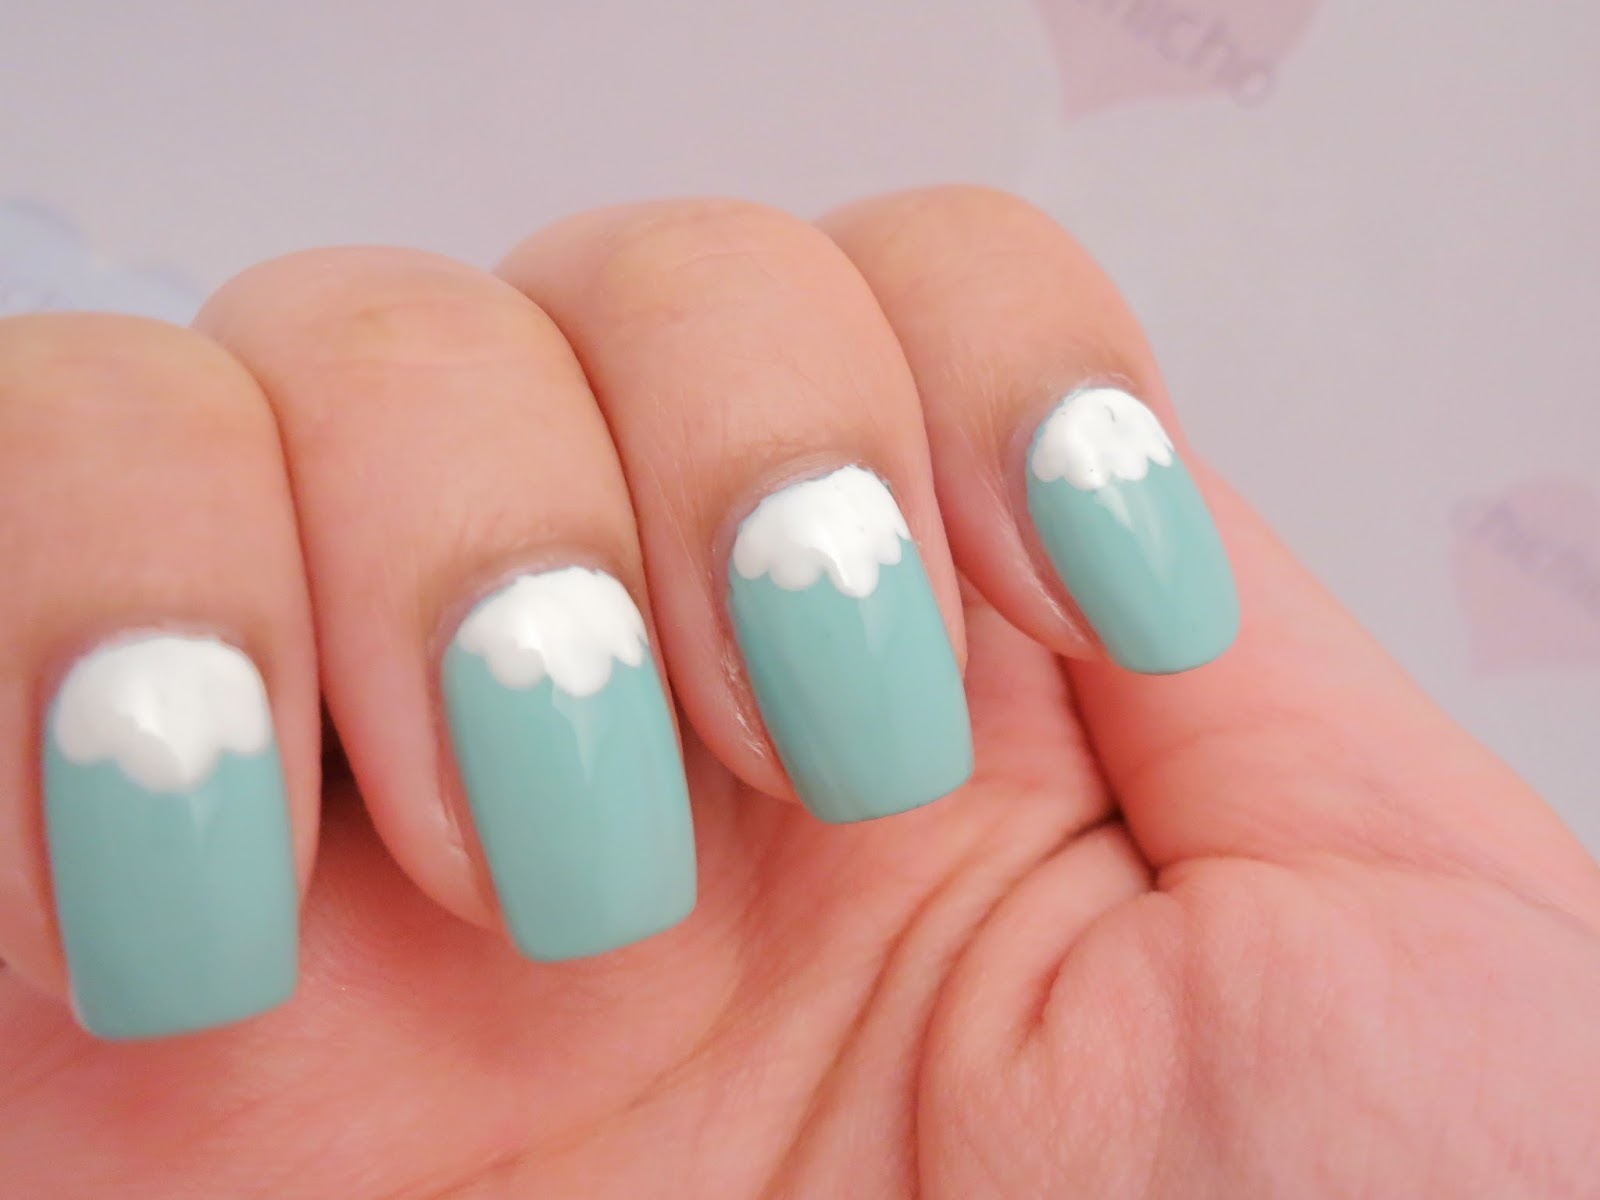 Half Moon Nail Art Tutorial with Tape - wide 4